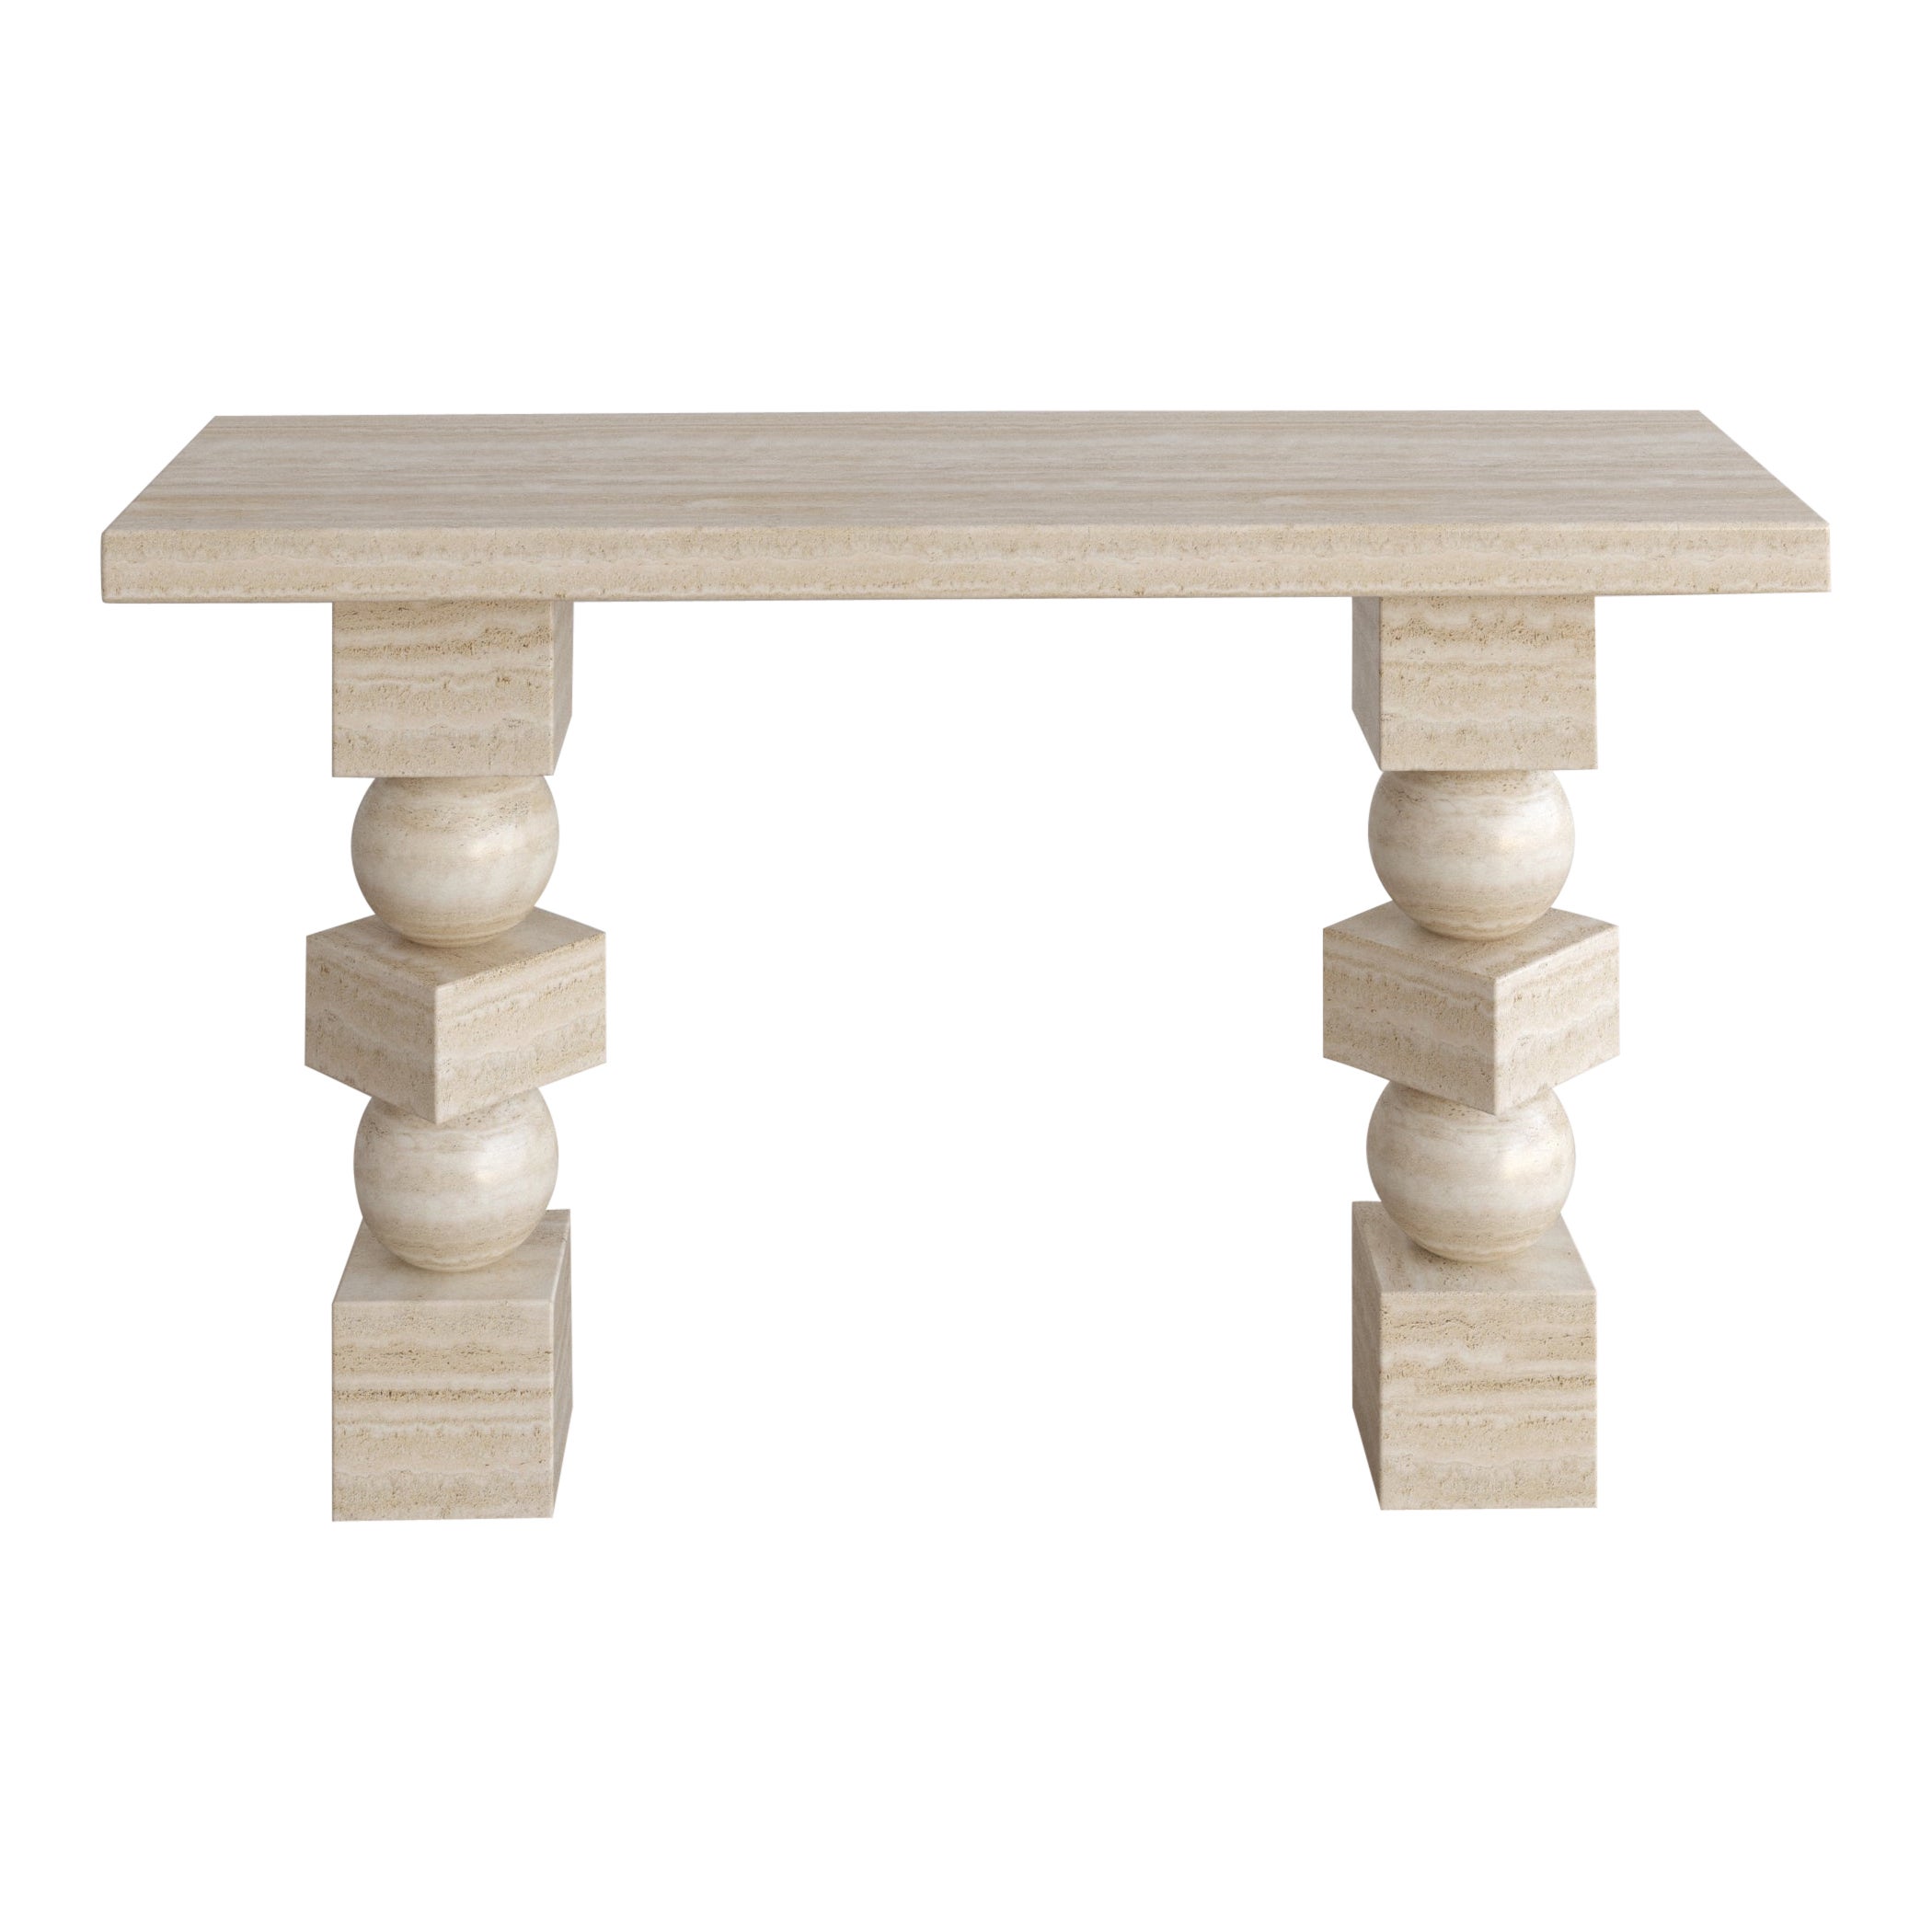 Nude Travertine Sufi Console Table by the Essentialist For Sale